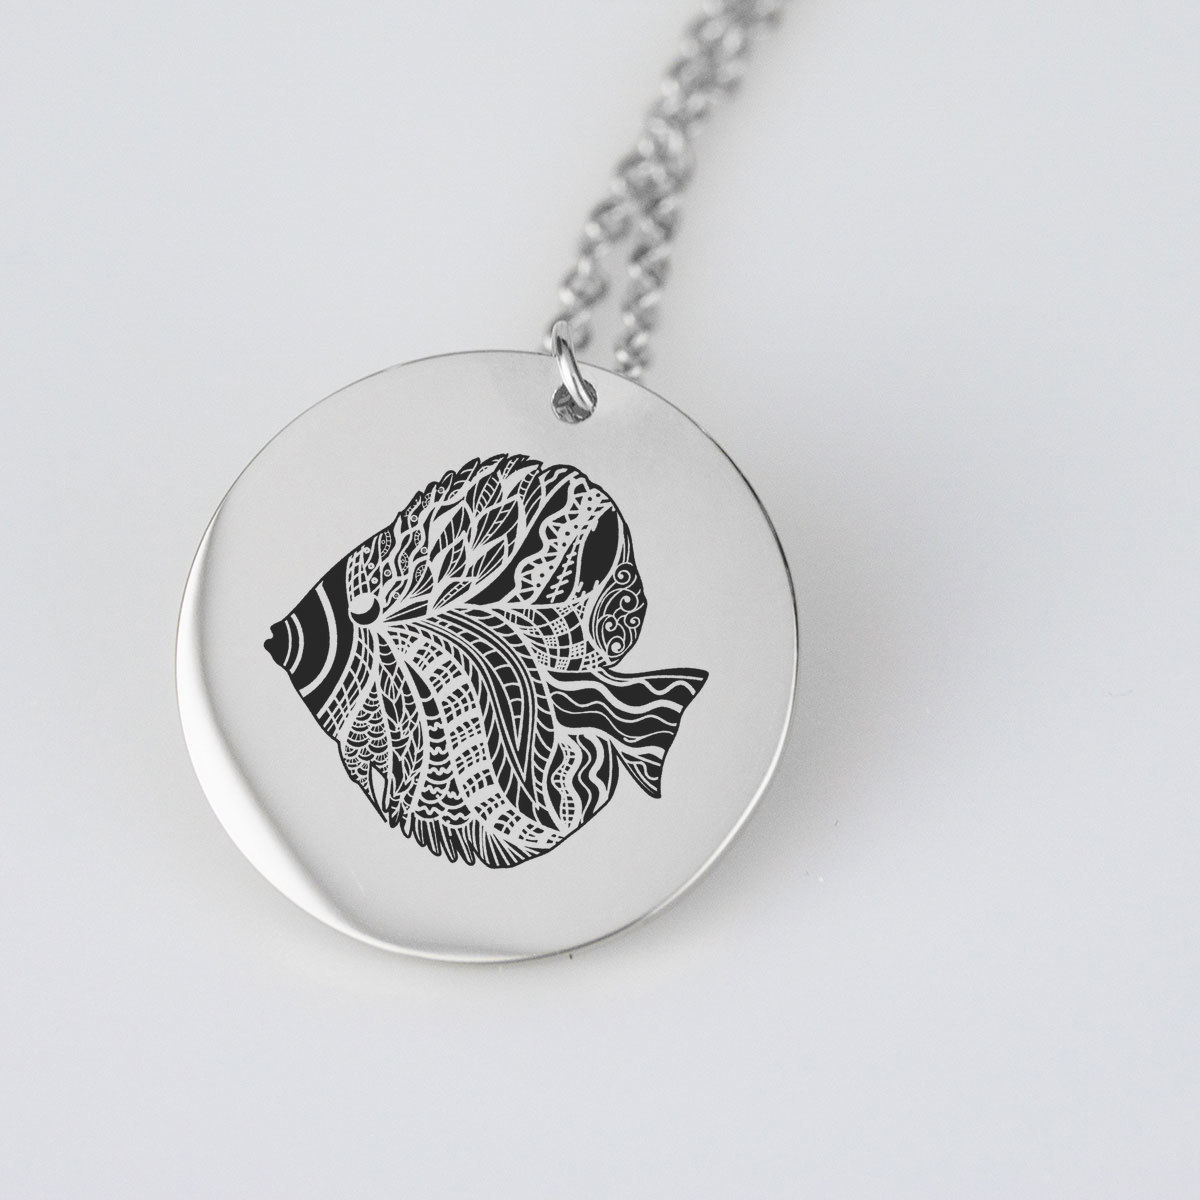 Angel Fish Silhouette Charm Necklace